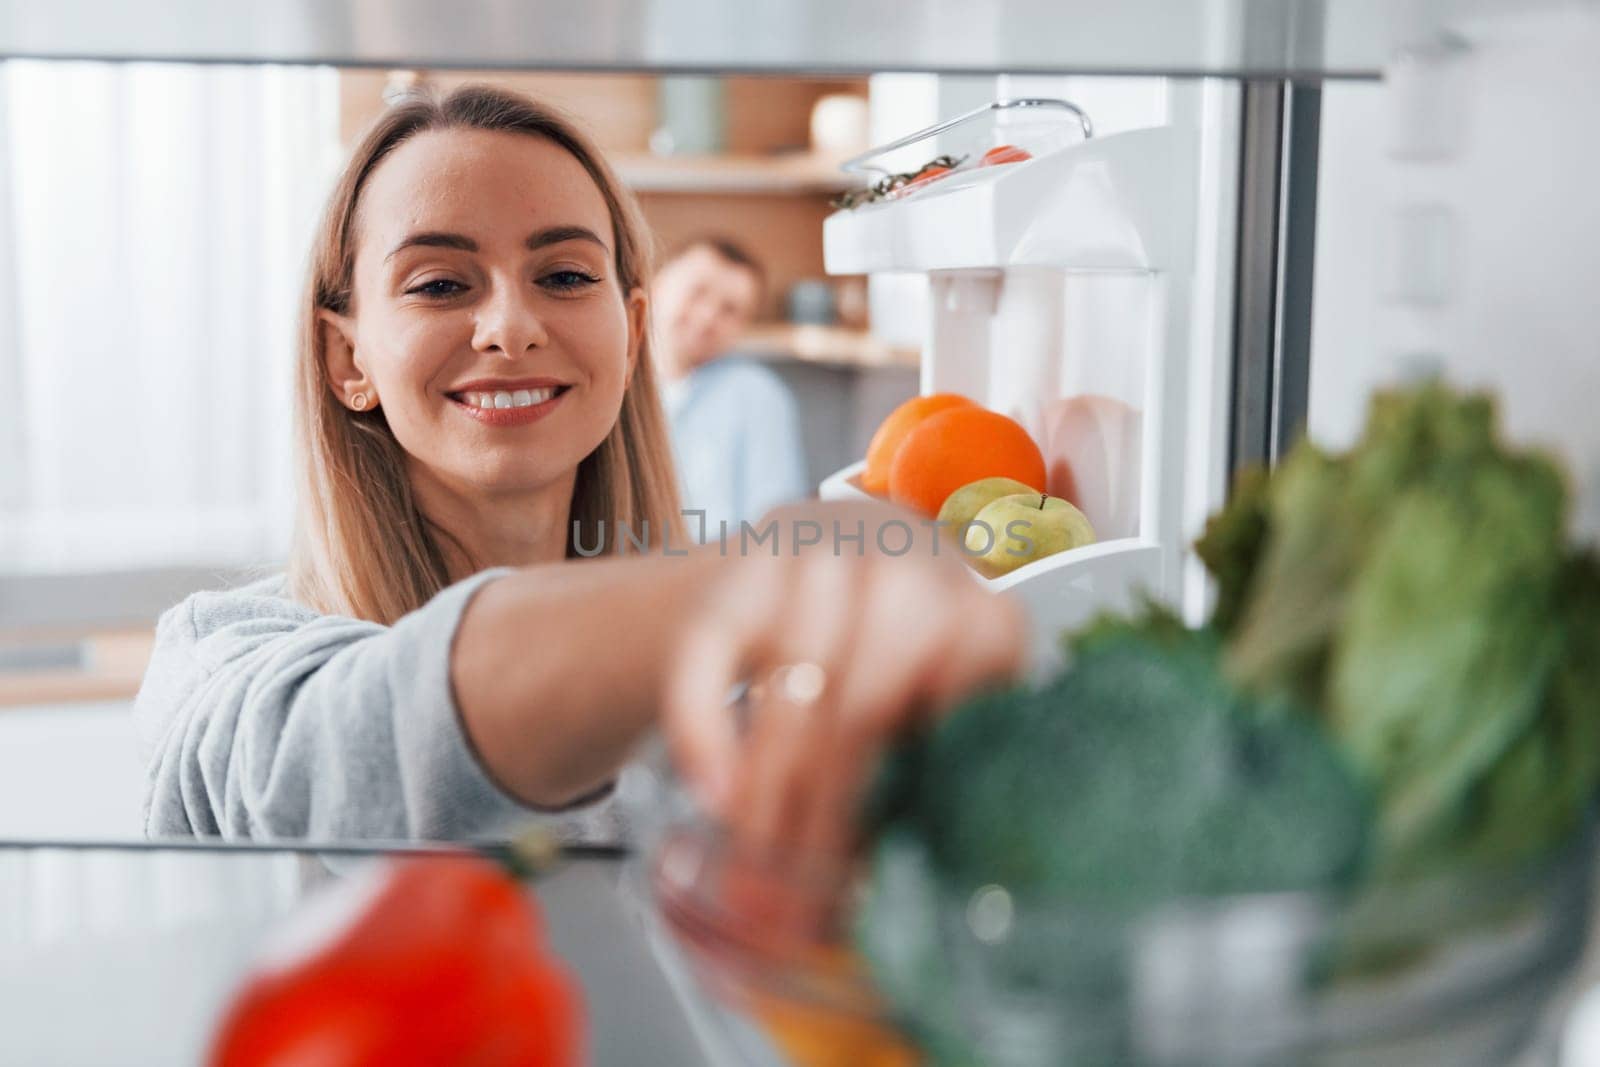 Using vegetables. Couple preparing food at home on the modern kitchen by Standret